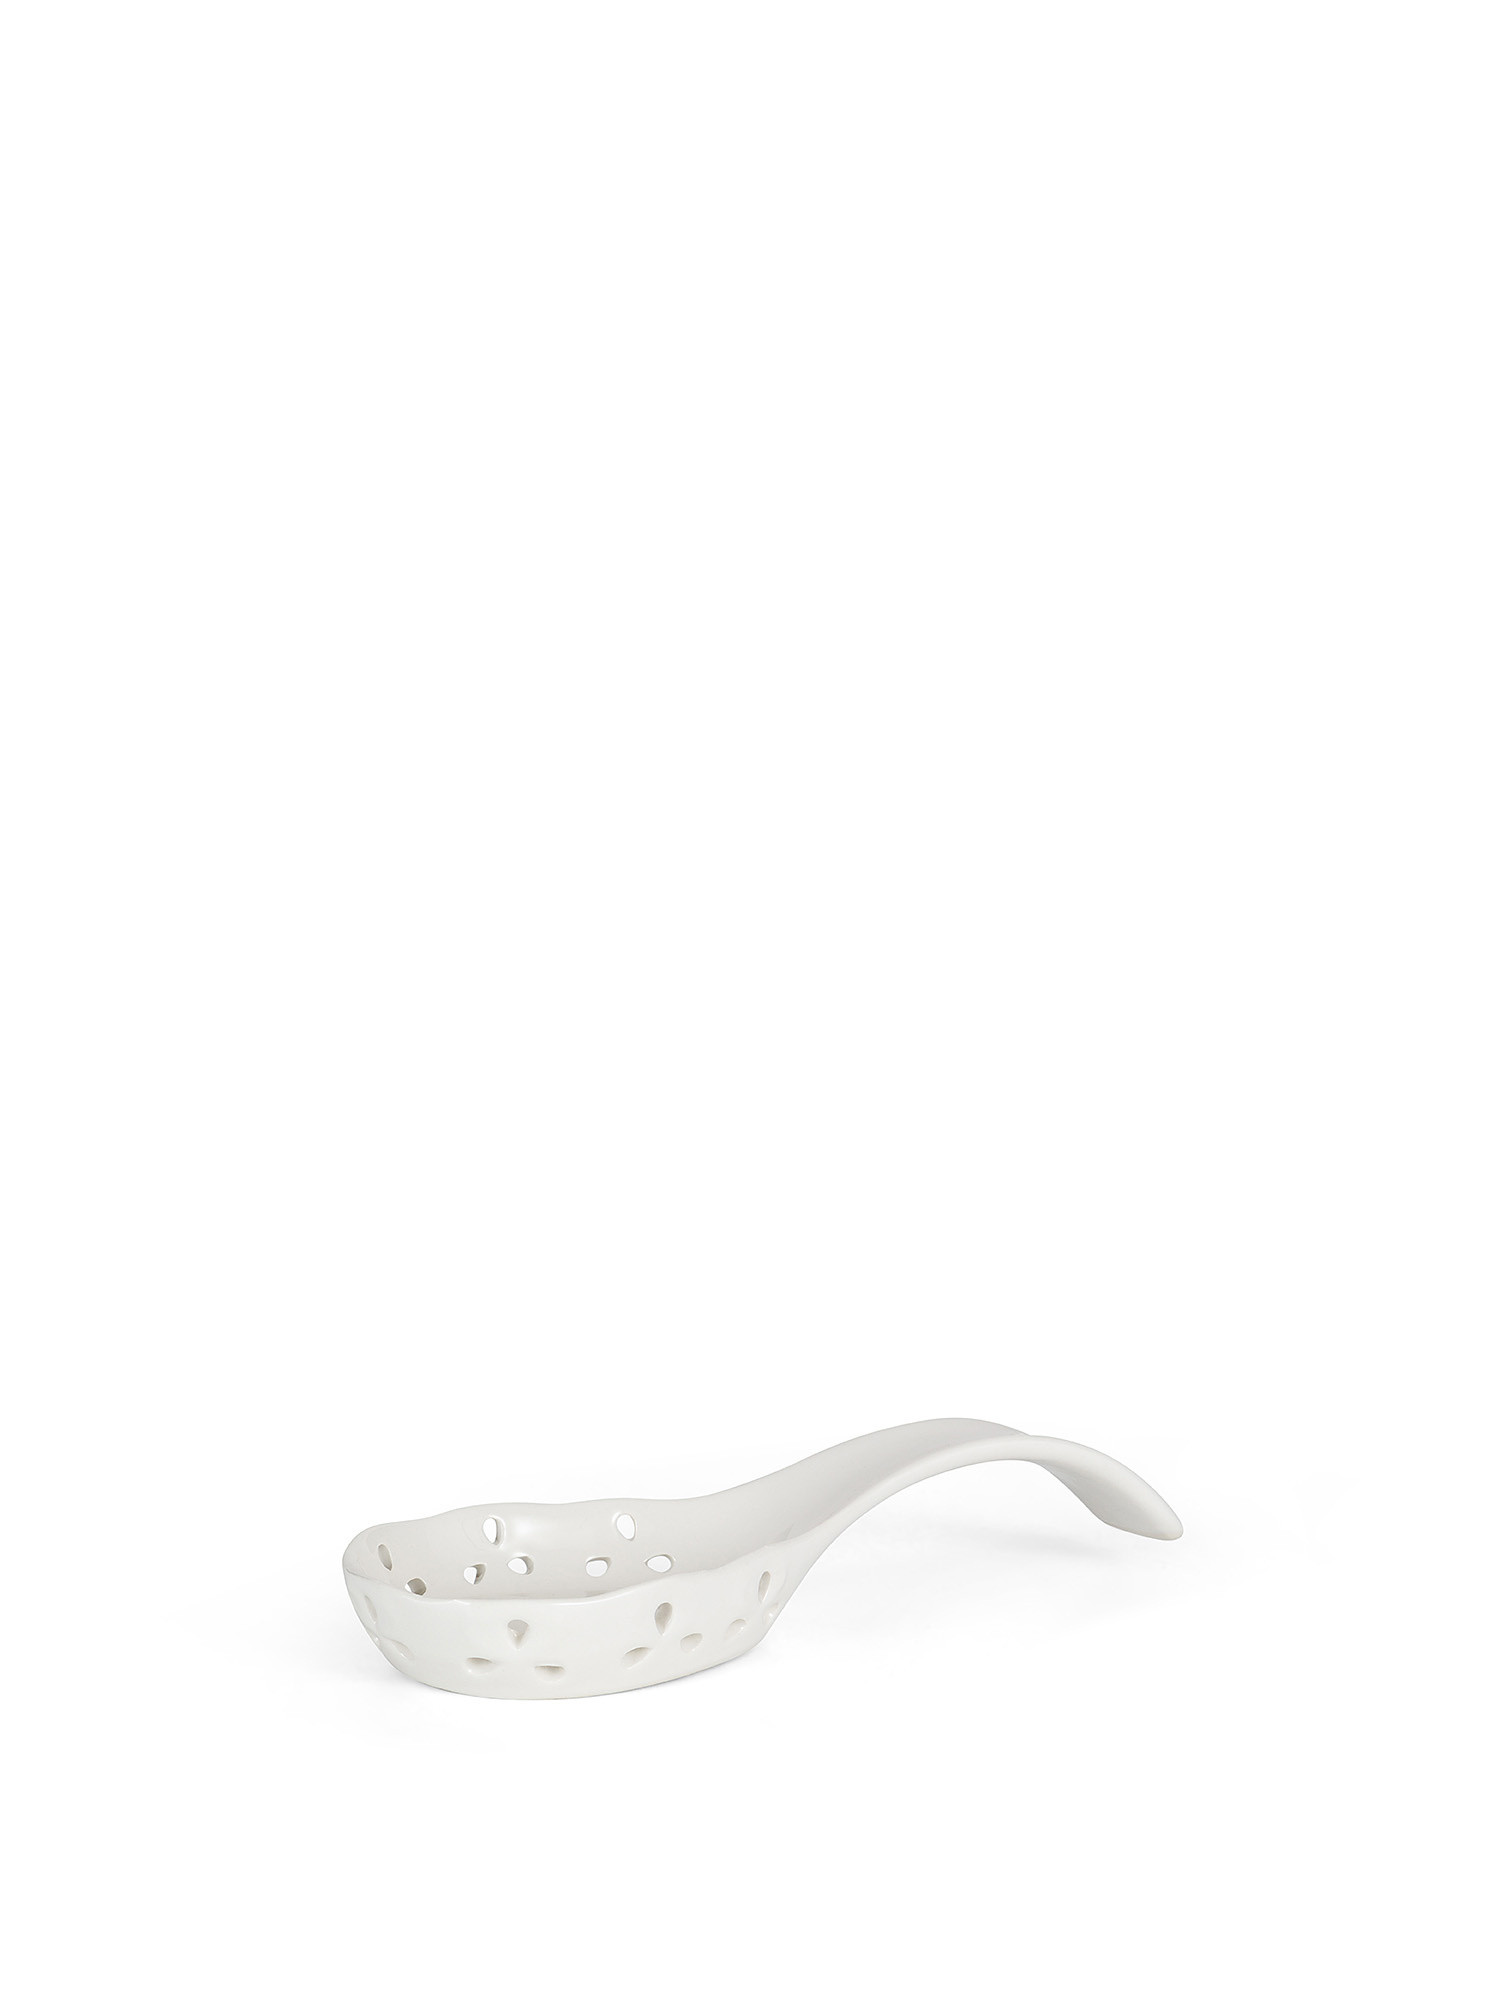 Ceramic spoon holder with perforated edge, White, large image number 0